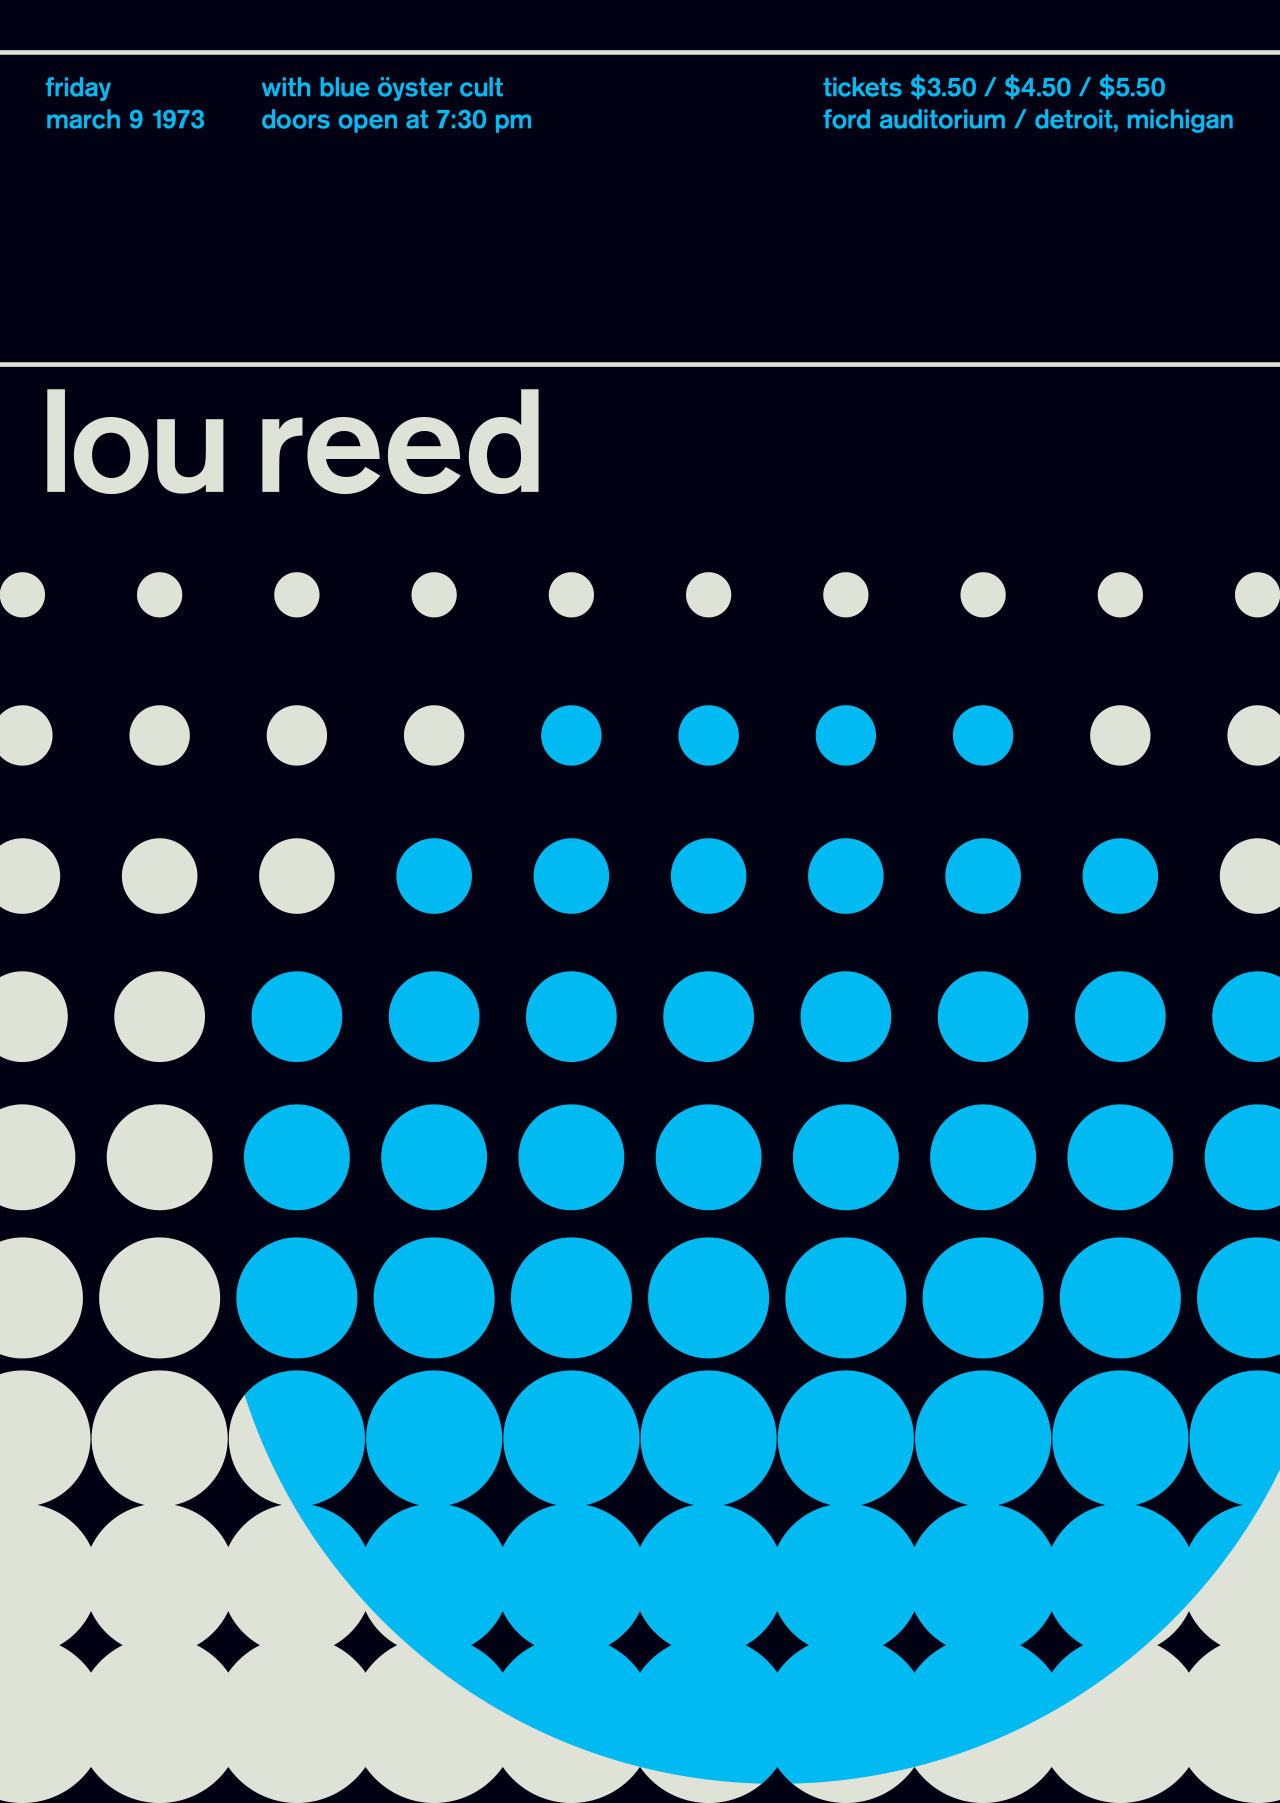 Swissted-Legends_Posters-10-lou_reed_legends_series